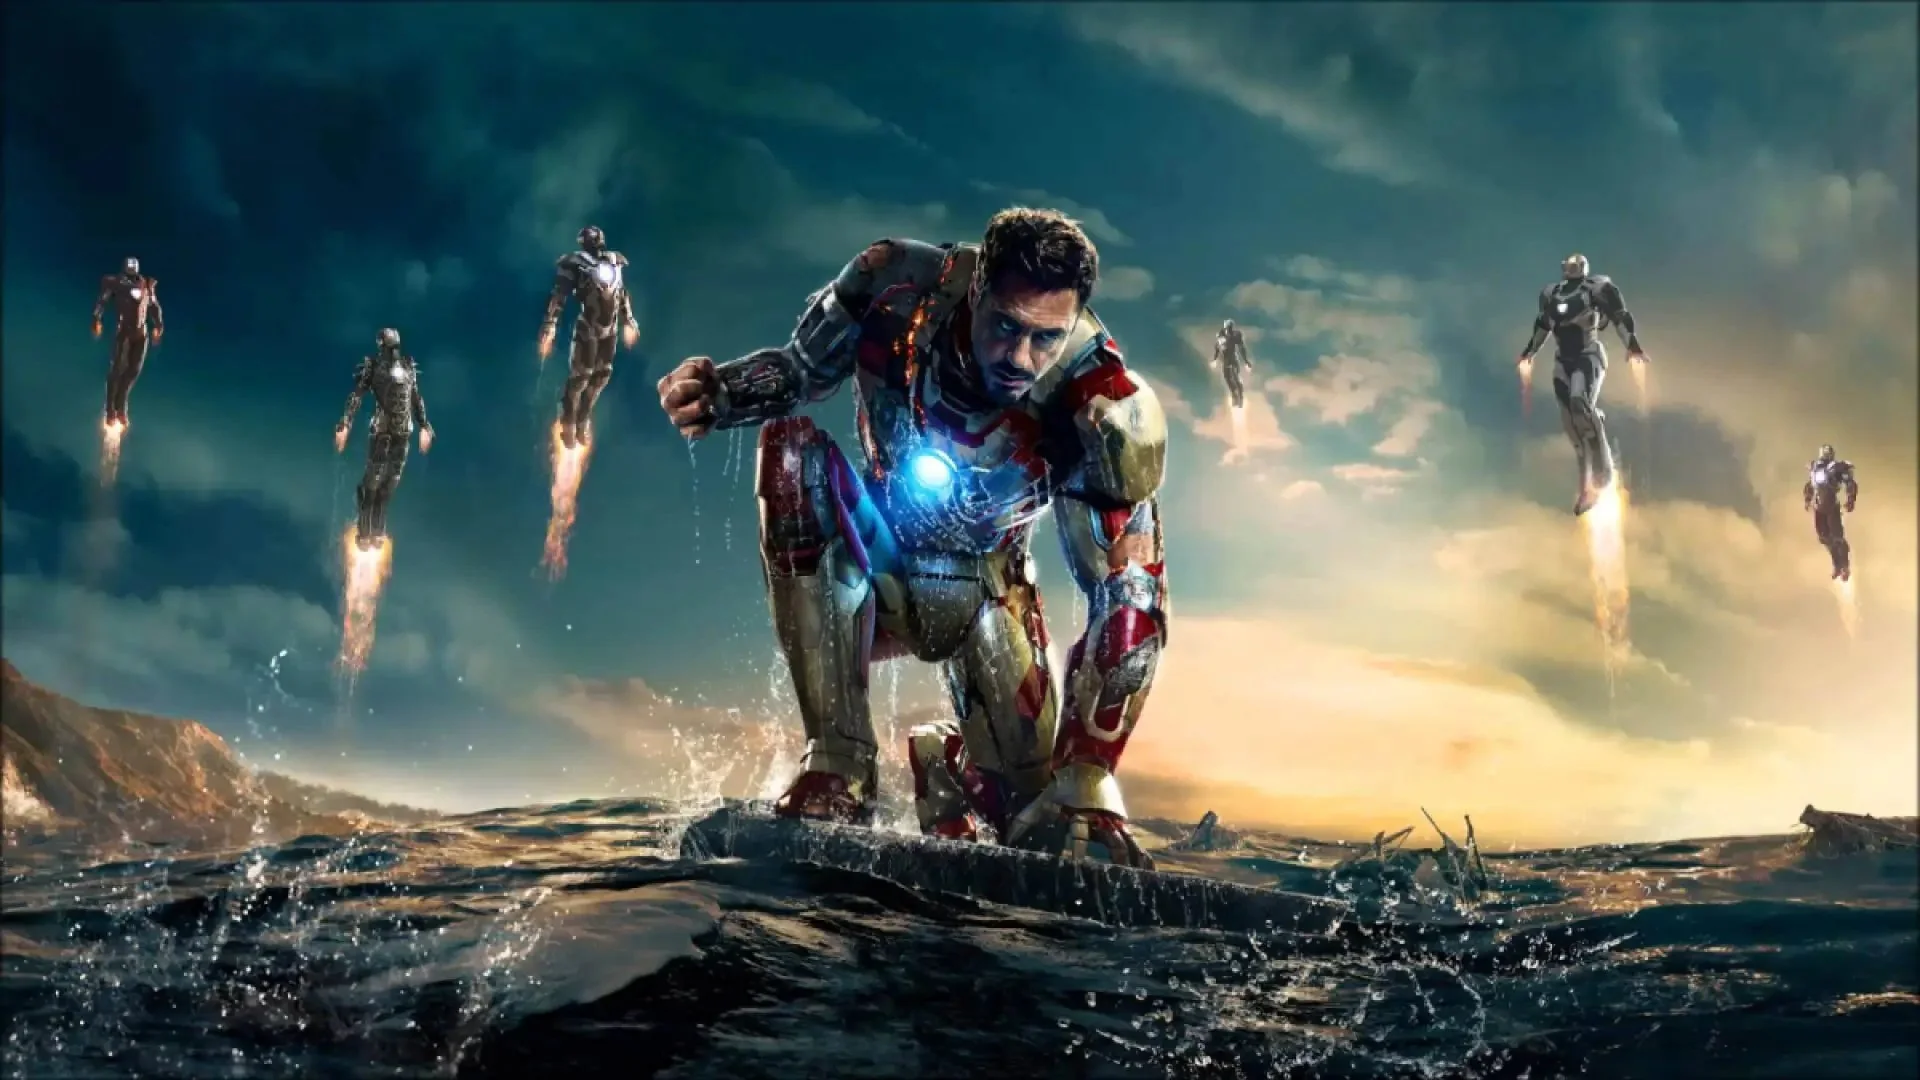 Will Iron Man Ever Come Back? Kevin Feige's Big Hint on Marvel's Future Plans